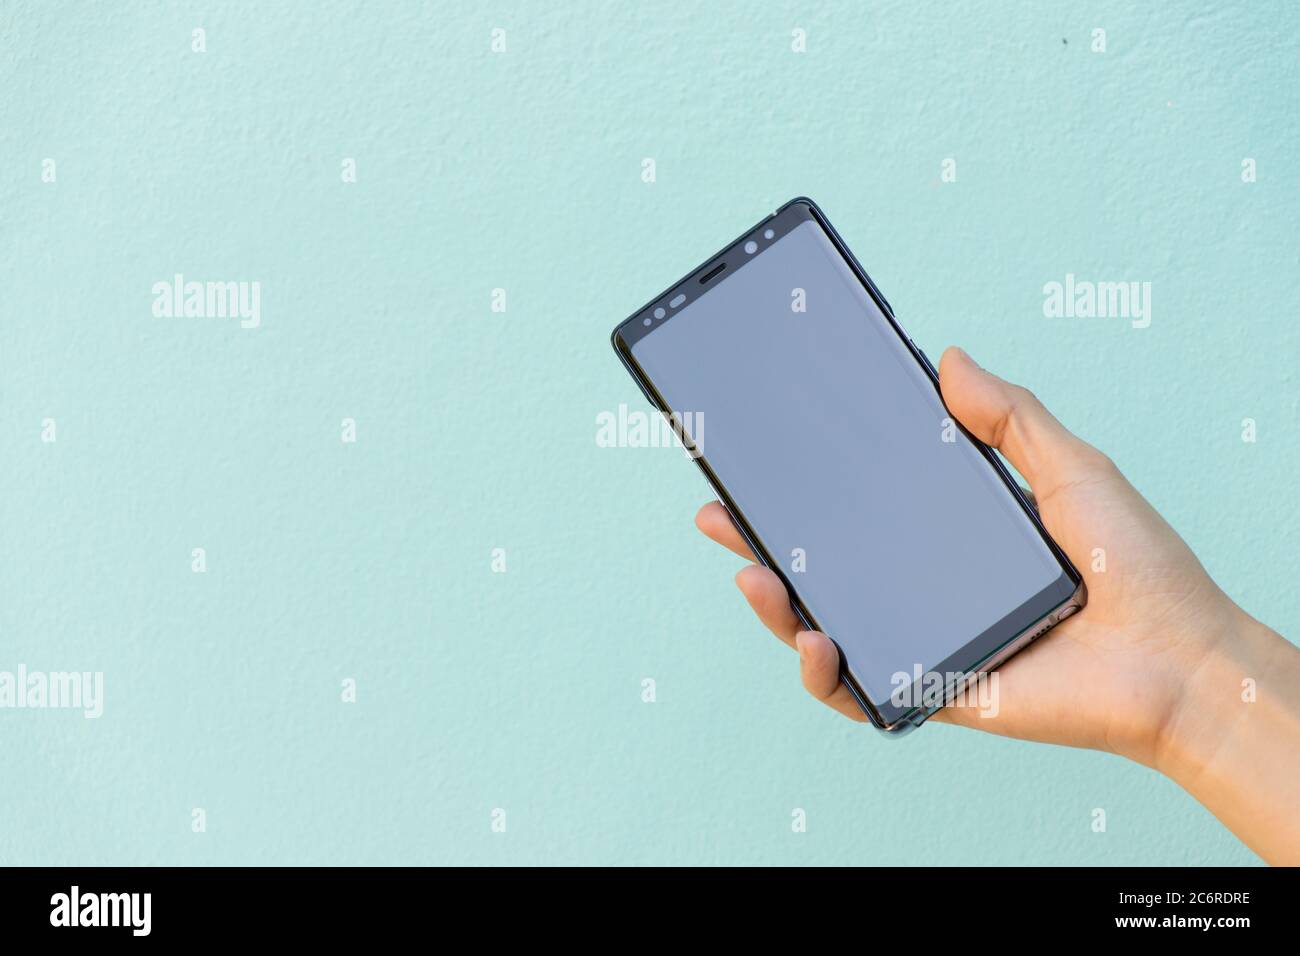 BANGKOK, THAILAND : Dec 30, 2017 - Woman hold smart phone Samsung galaxy note 8 (Android OS) on blue concrete background Stock Photo